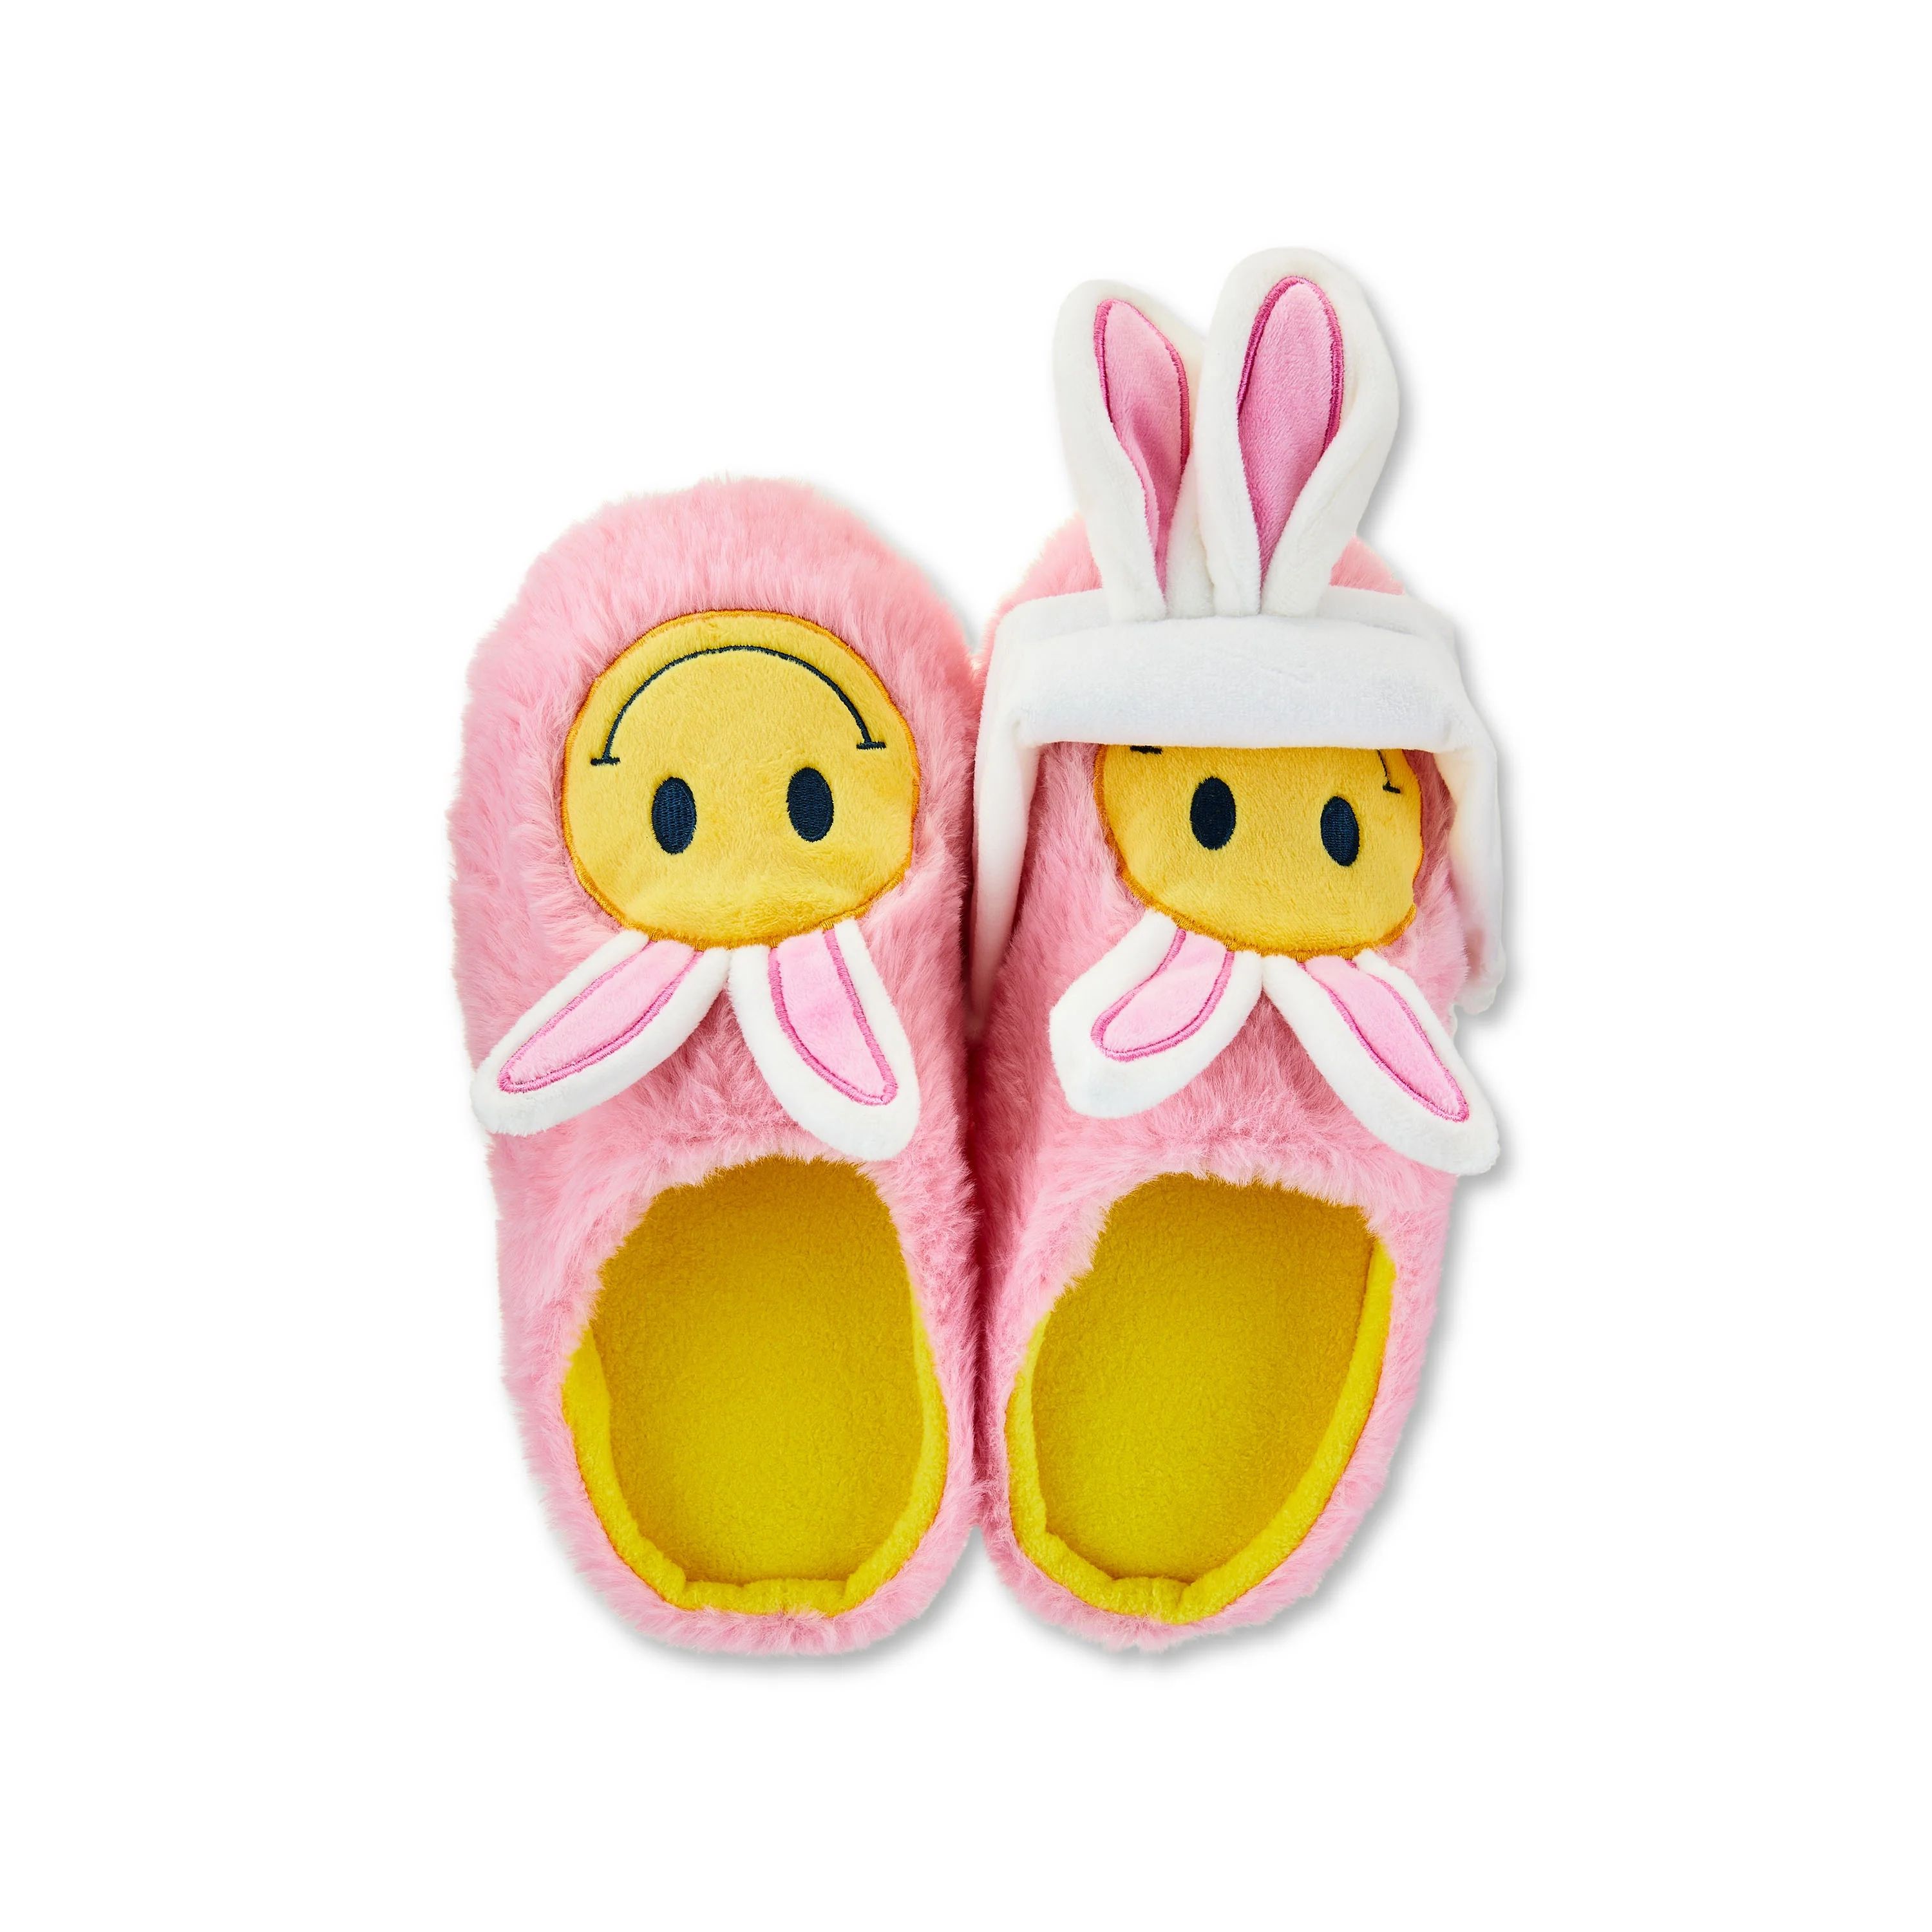 Easter Slipper and Headband Set, Smiley, by Way To Celebrate | Walmart (US)